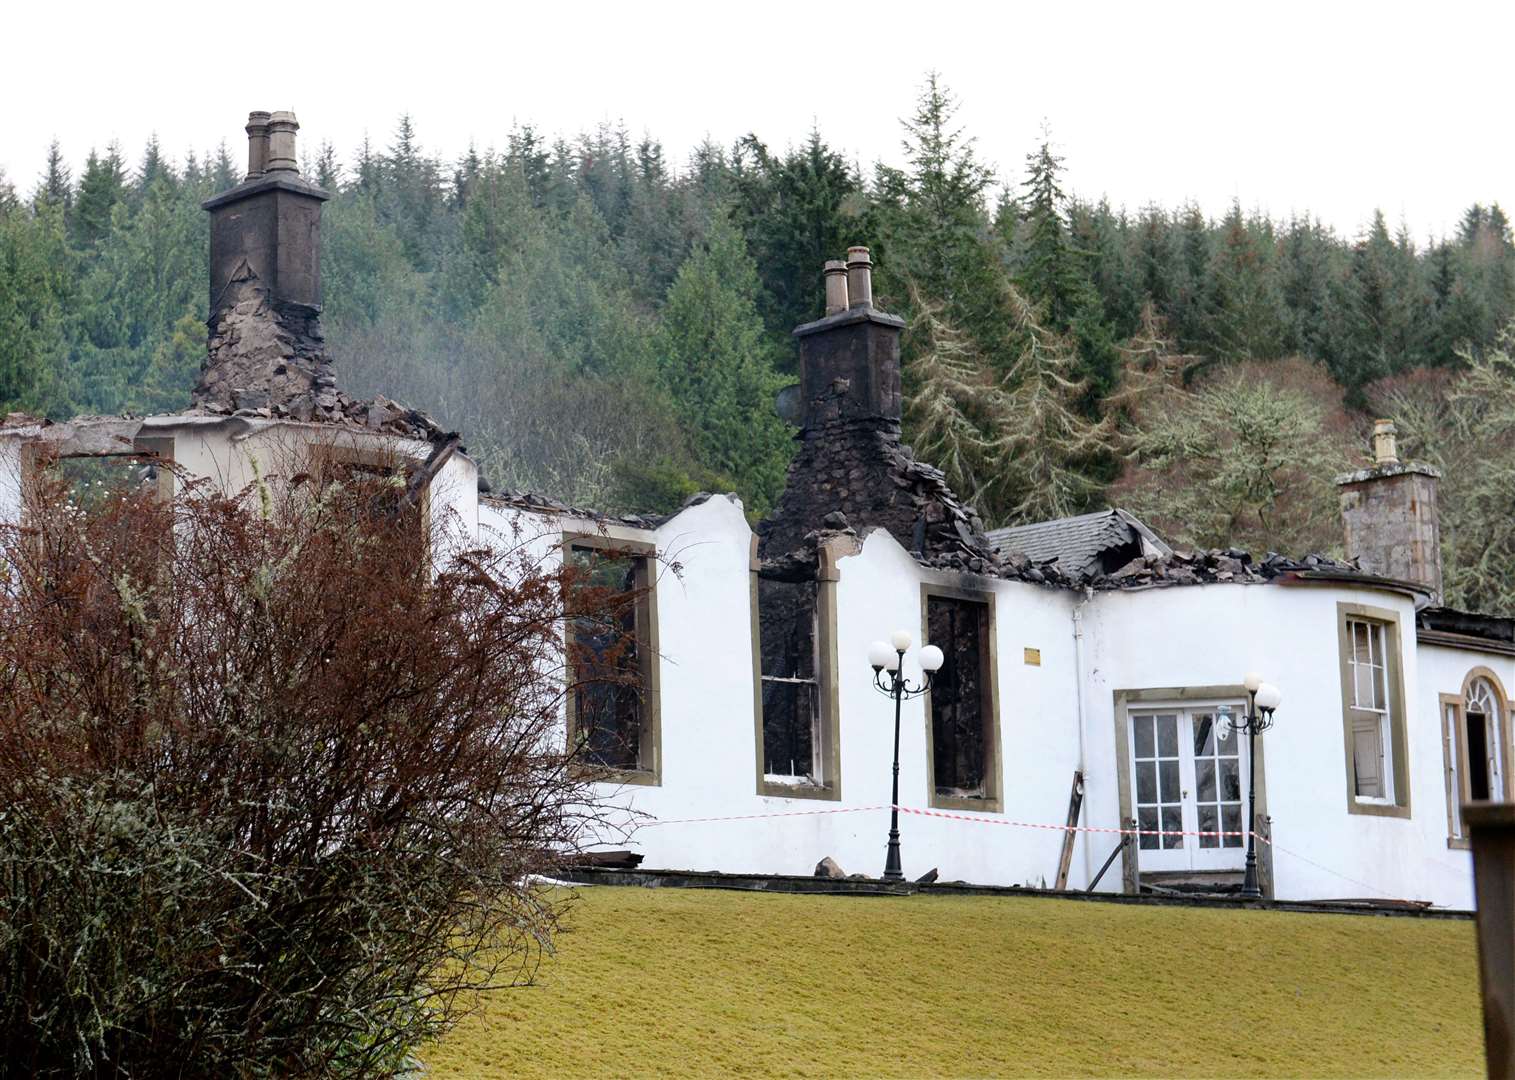 Boleskine House was further damaged by a fire last July.